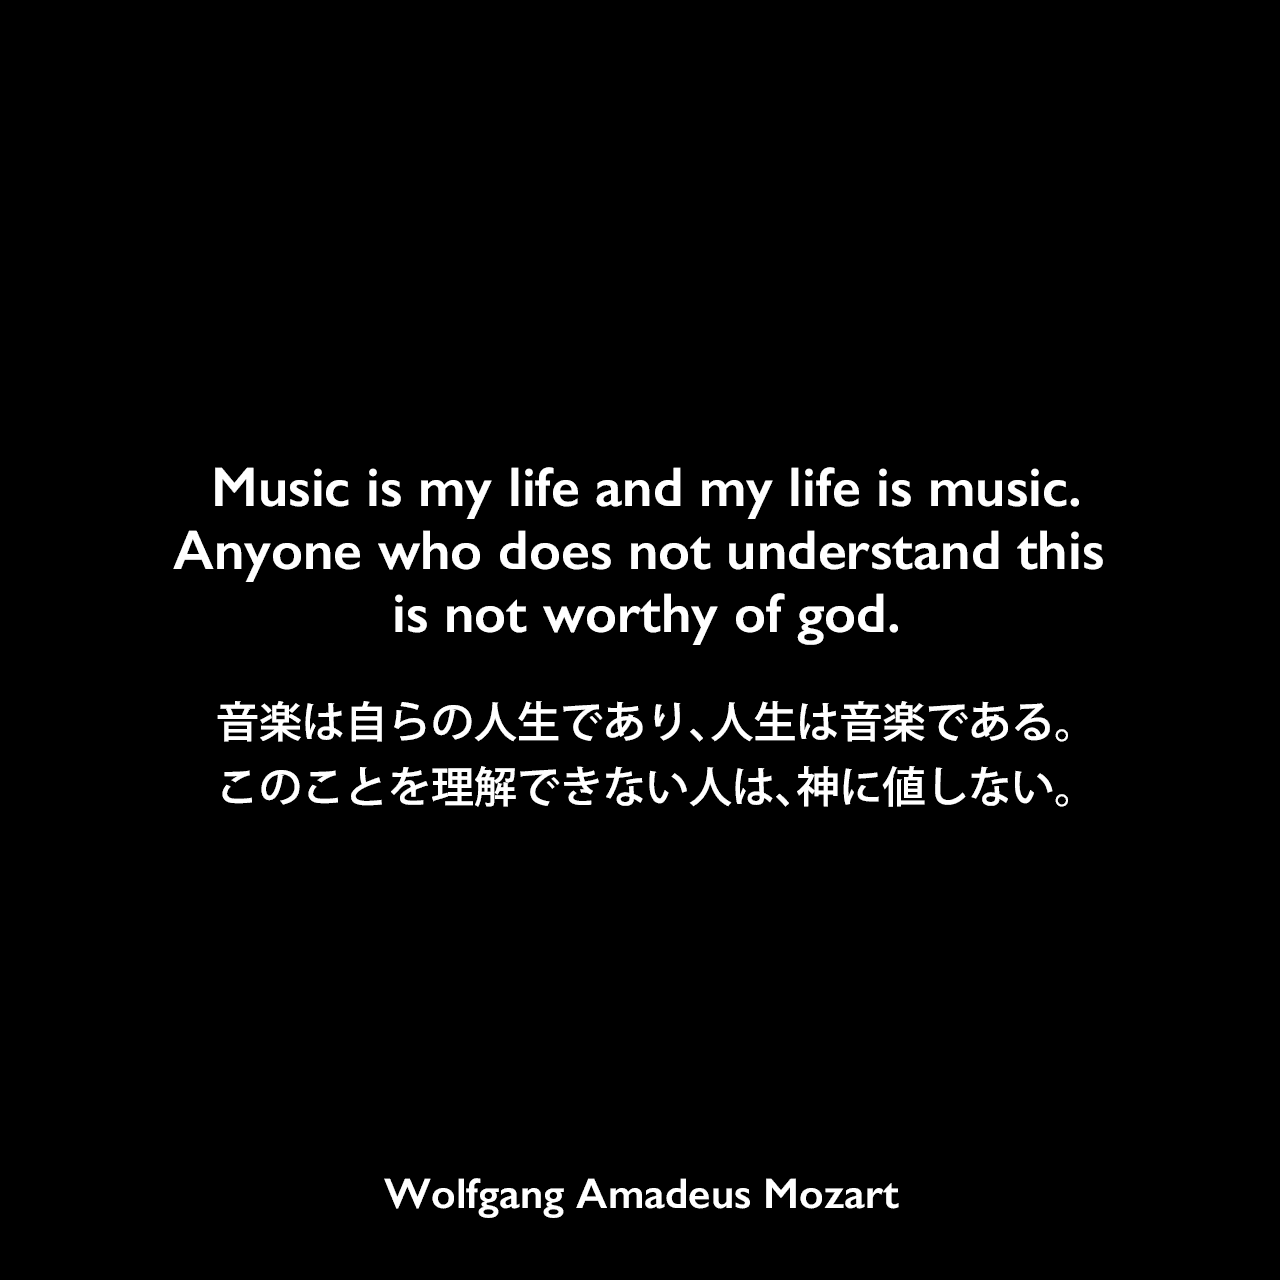 Music is my life and my life is music. Anyone who does not understand this is not worthy of god.音楽は自らの人生であり、人生は音楽である。このことを理解できない人は、神に値しない。Wolfgang Amadeus Mozart